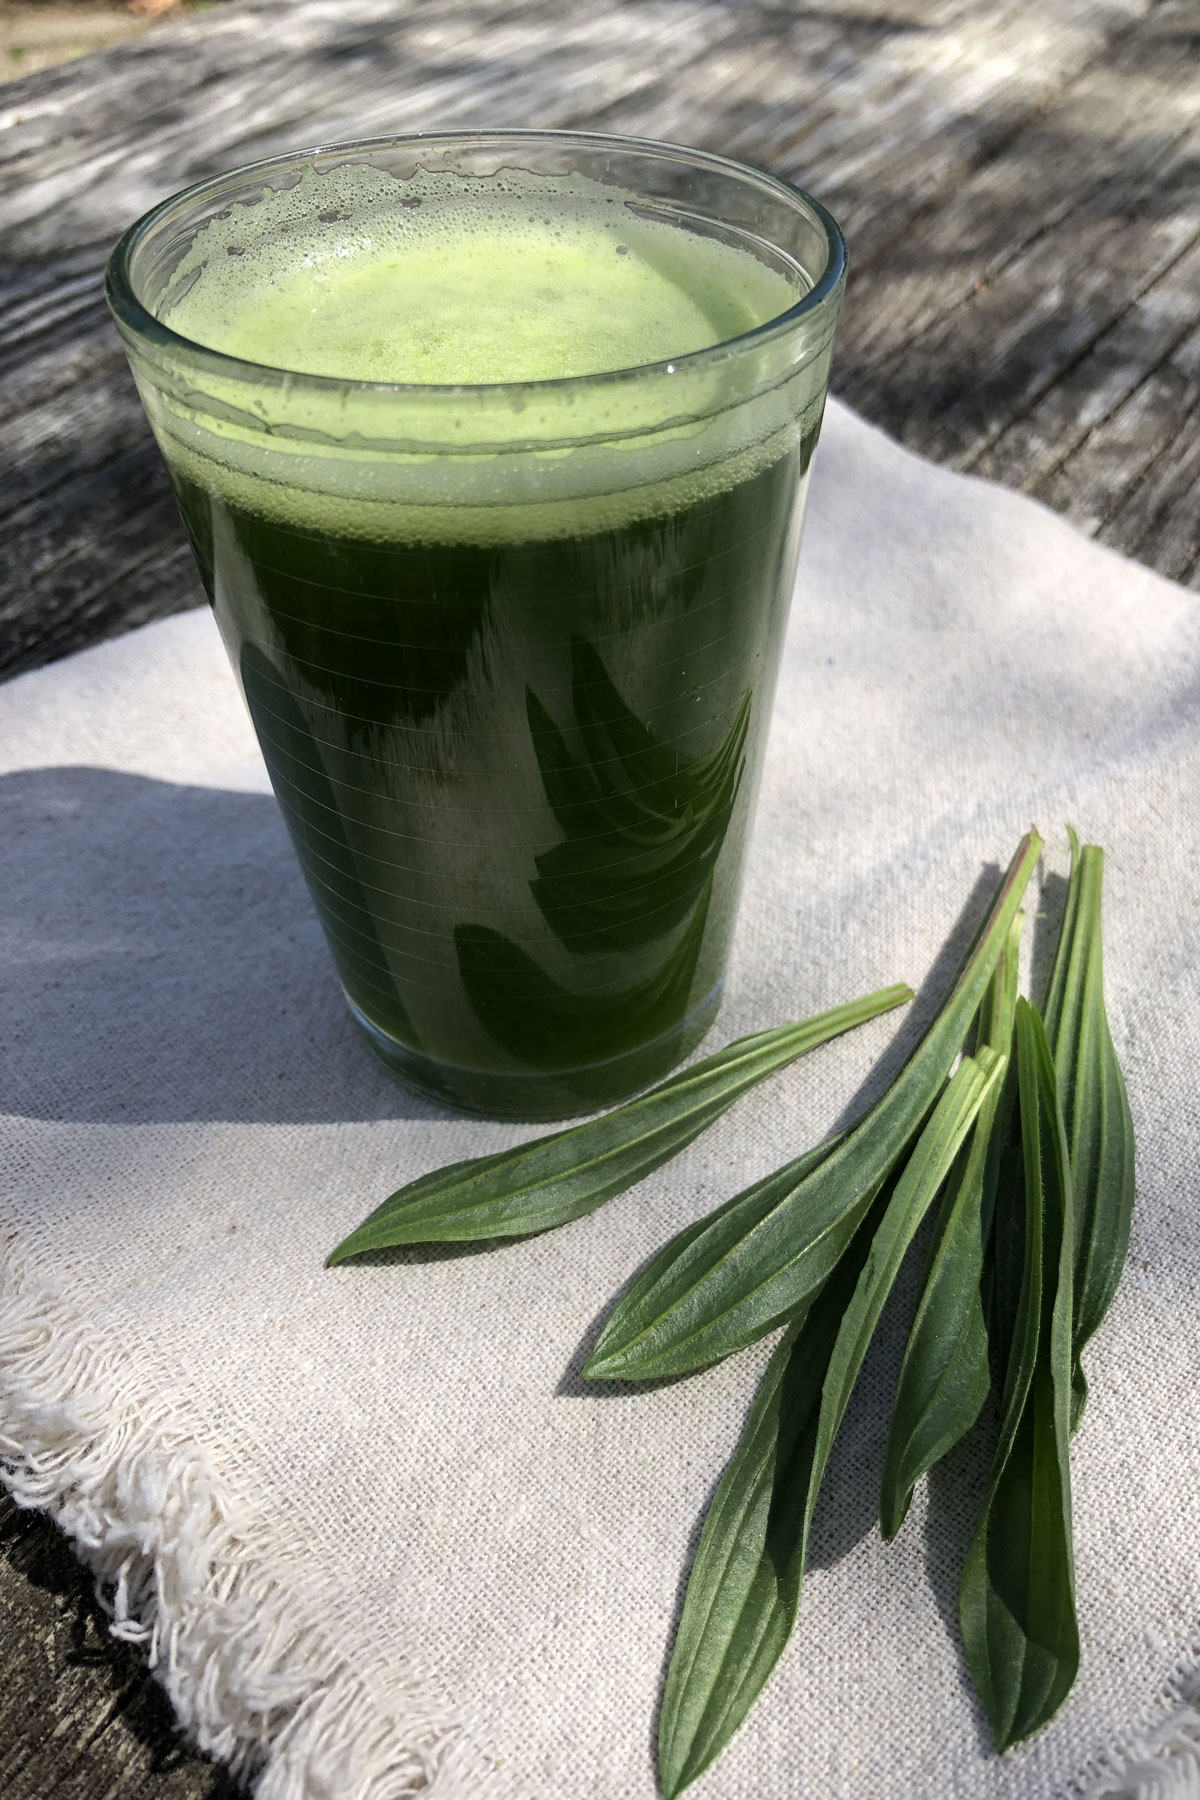 Plantain Leaf Benefits and Recipes | Herbal Academy | Learn the many benefits of plantain leaf (Plantago spp.) and how to use it in two simple recipes, a juice and a face mask.